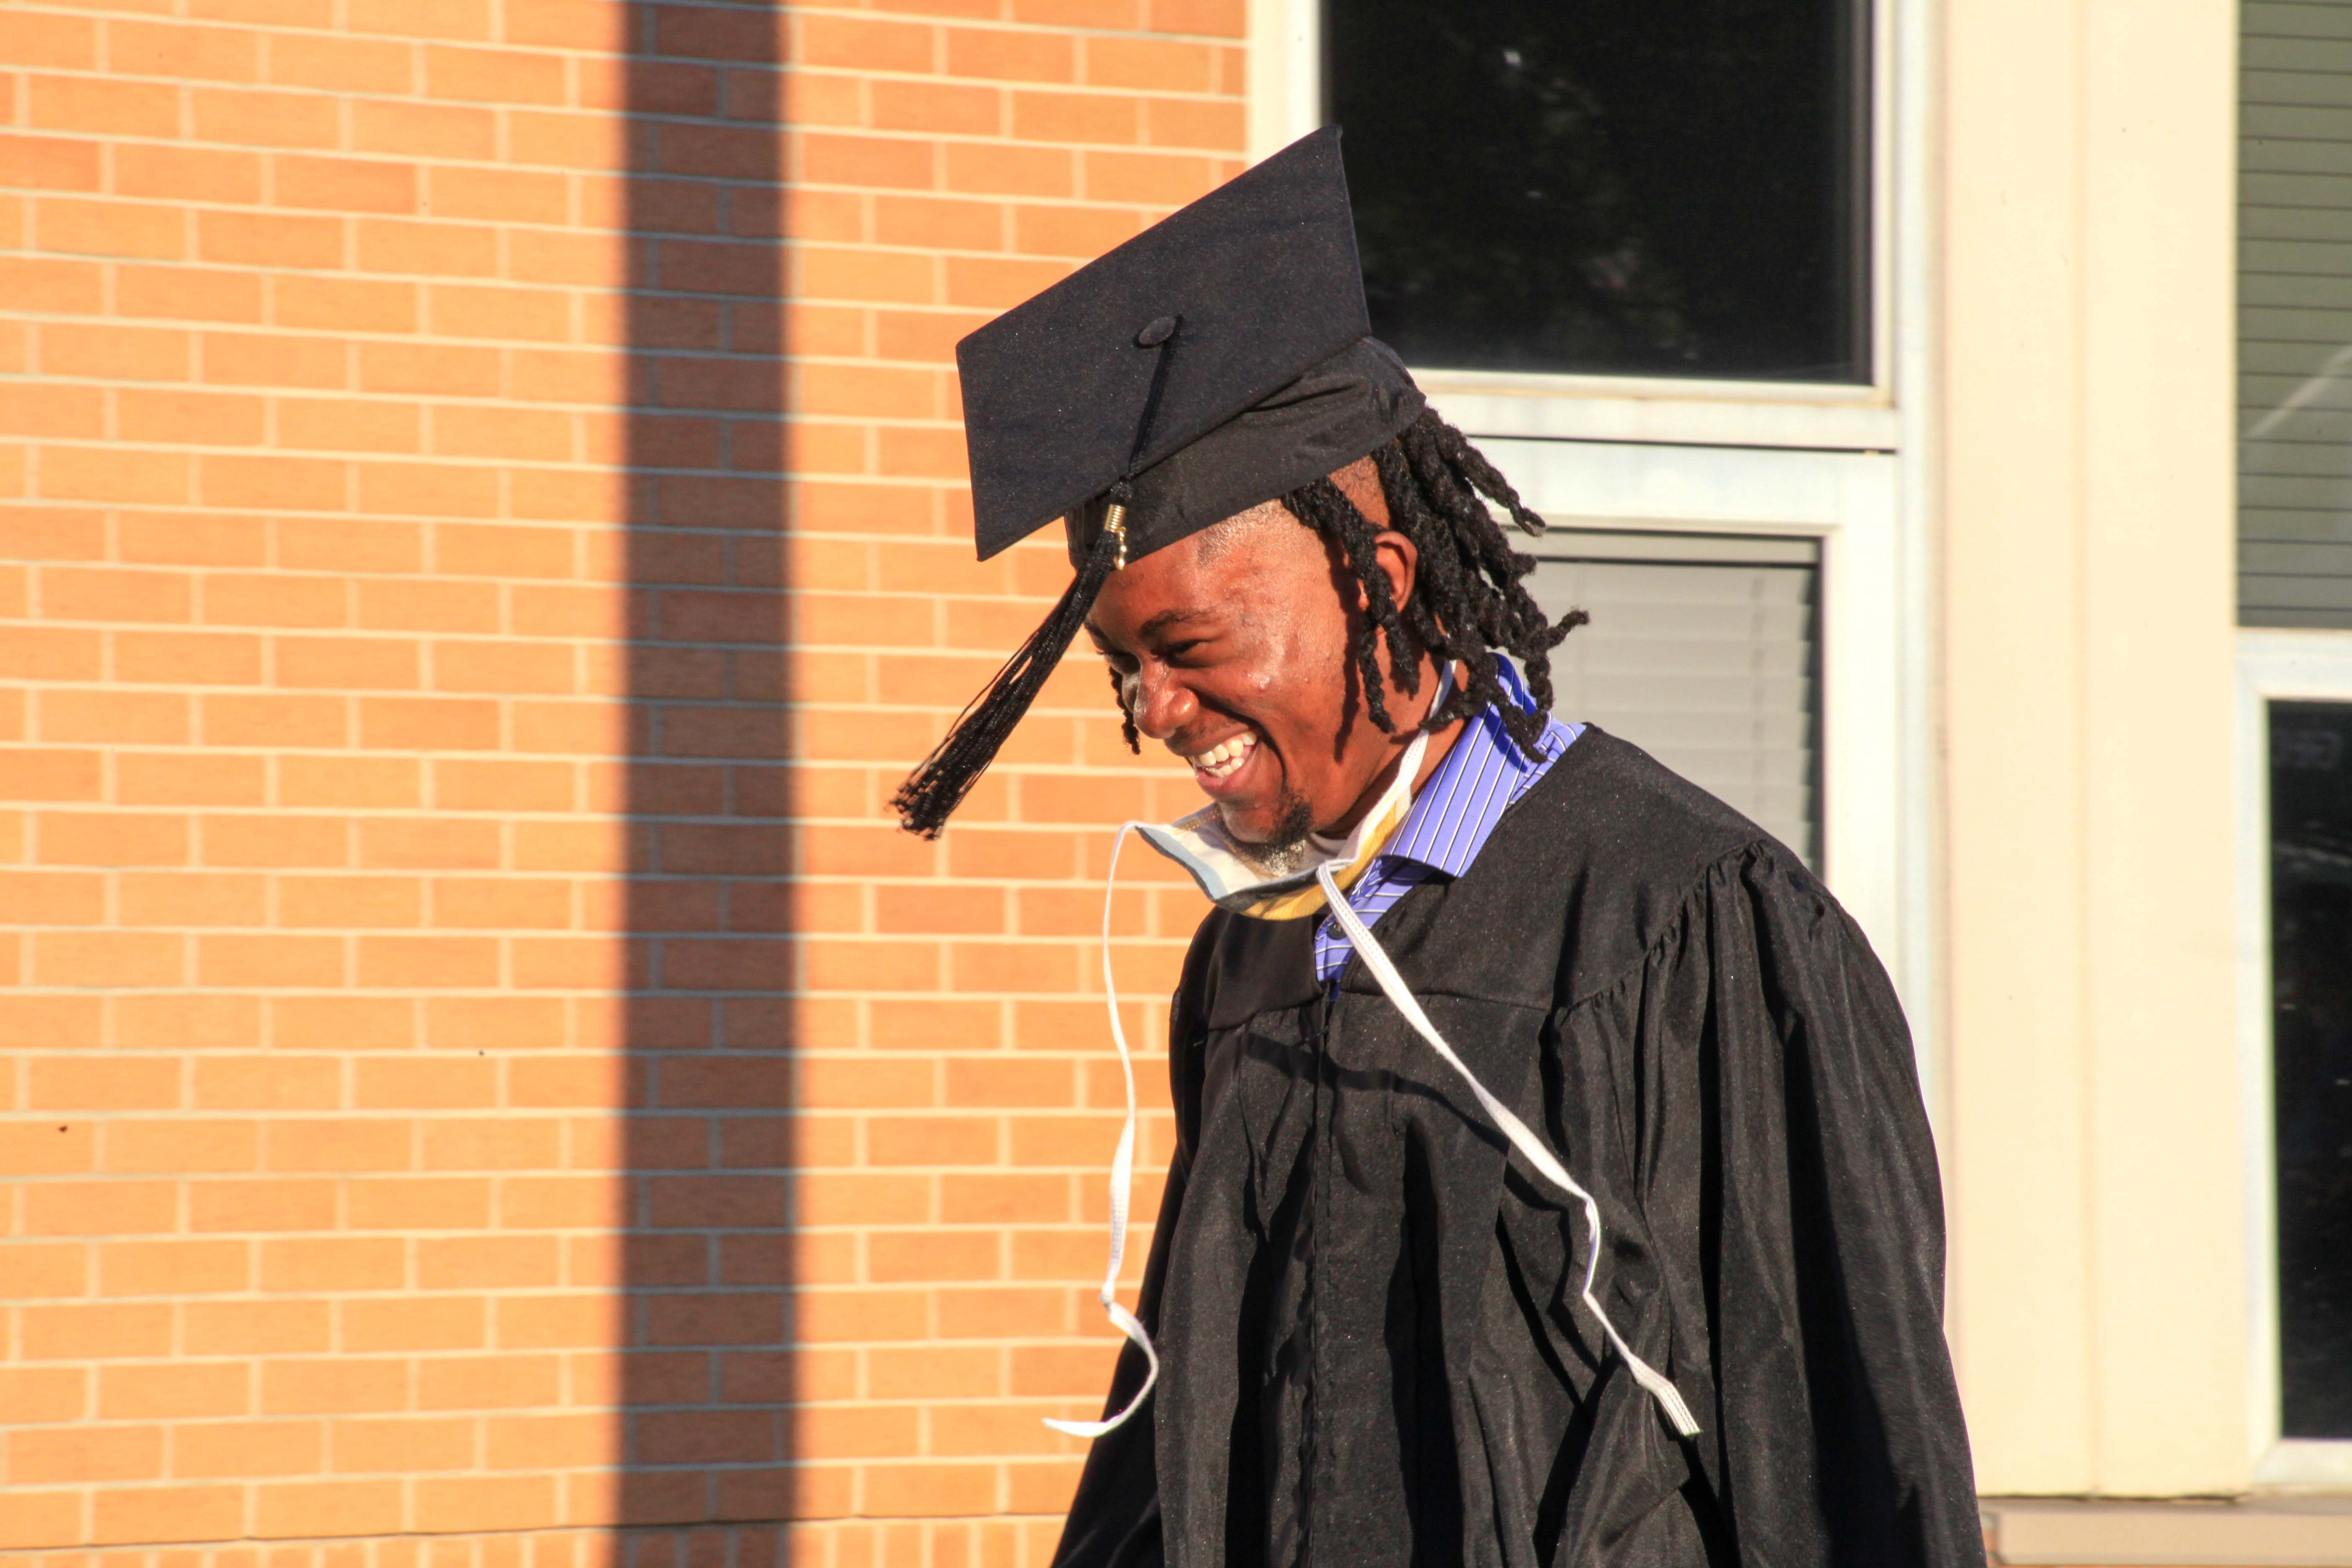 Quincy Chambers, a Respiratory Care major from the Floyd County Campus, smiles as he walks down the blue carpet to receive his associate degree during GNTC’s 2021 Spring Drive-Thru Commencement Ceremony on Thursday, May 6.